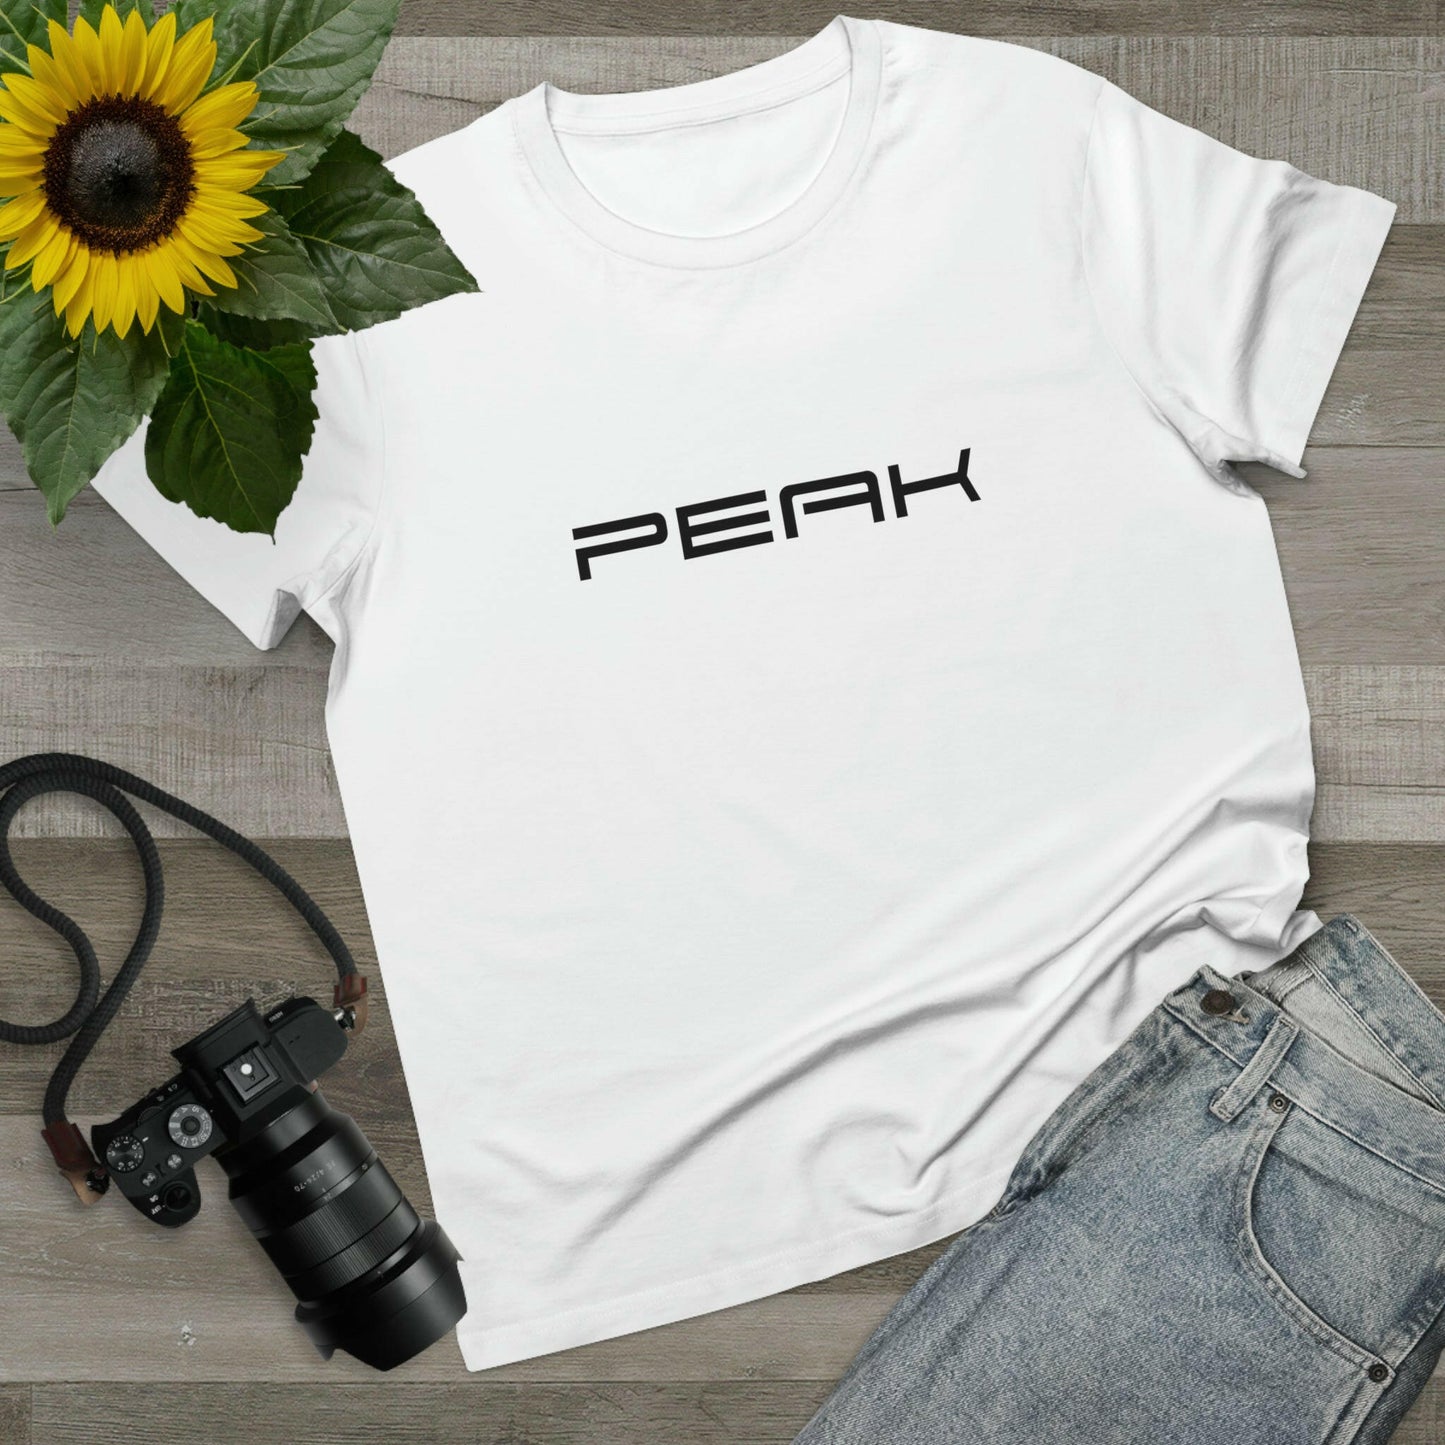 PEAK Women’s Maple Tee (Available in 5 Colors)